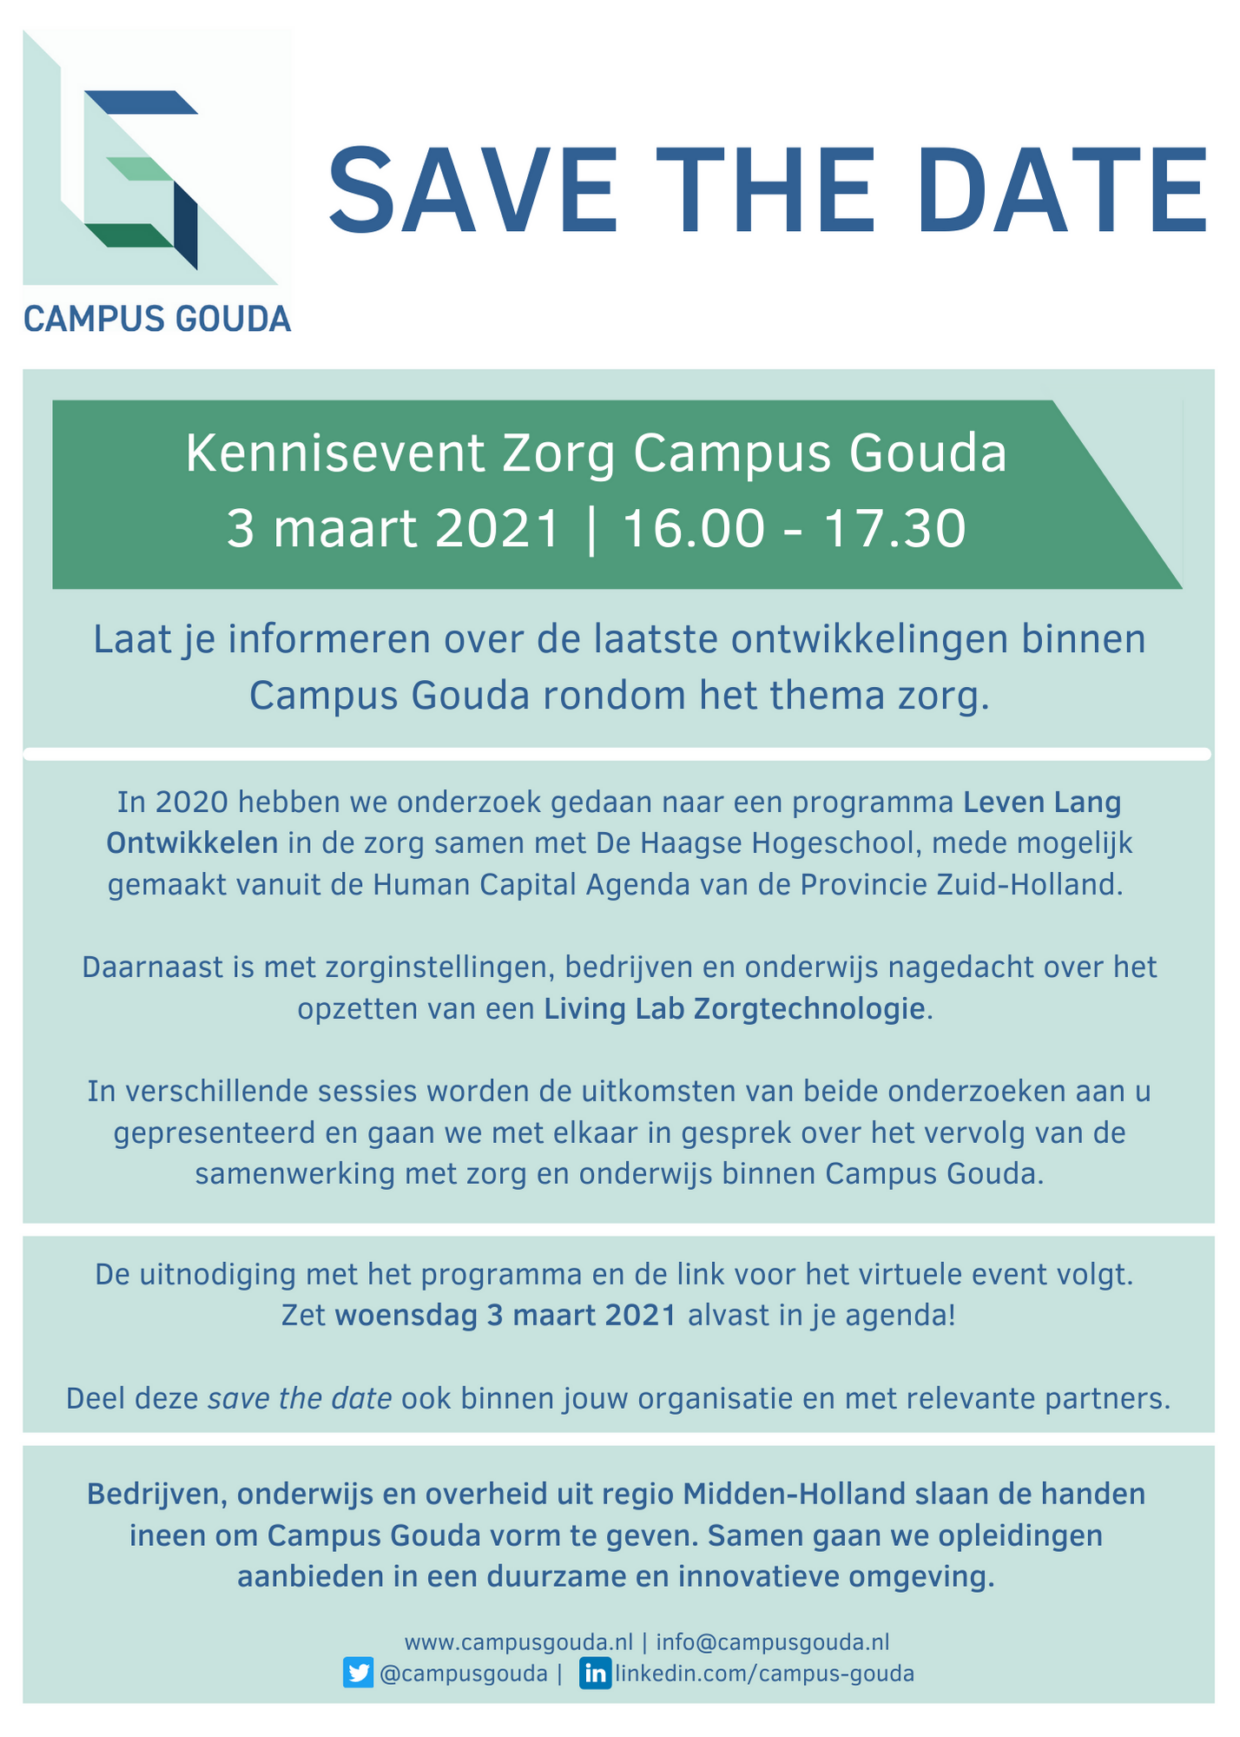 save-the-date-kennis-event-zorg-campus-gouda